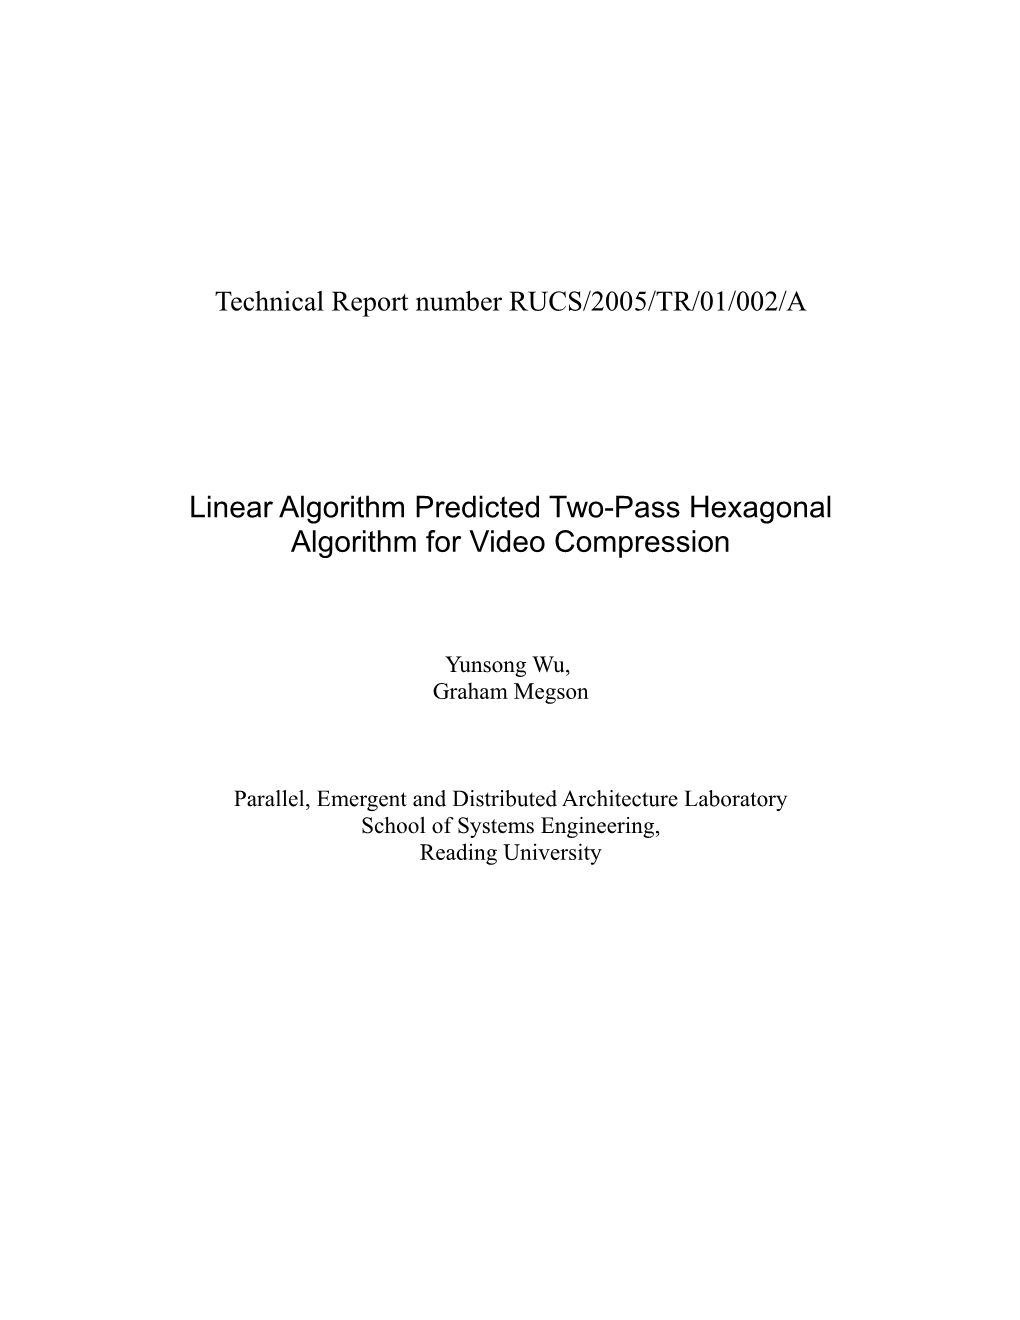 Technical Report Number RUCS/2005/TR/11/002/A